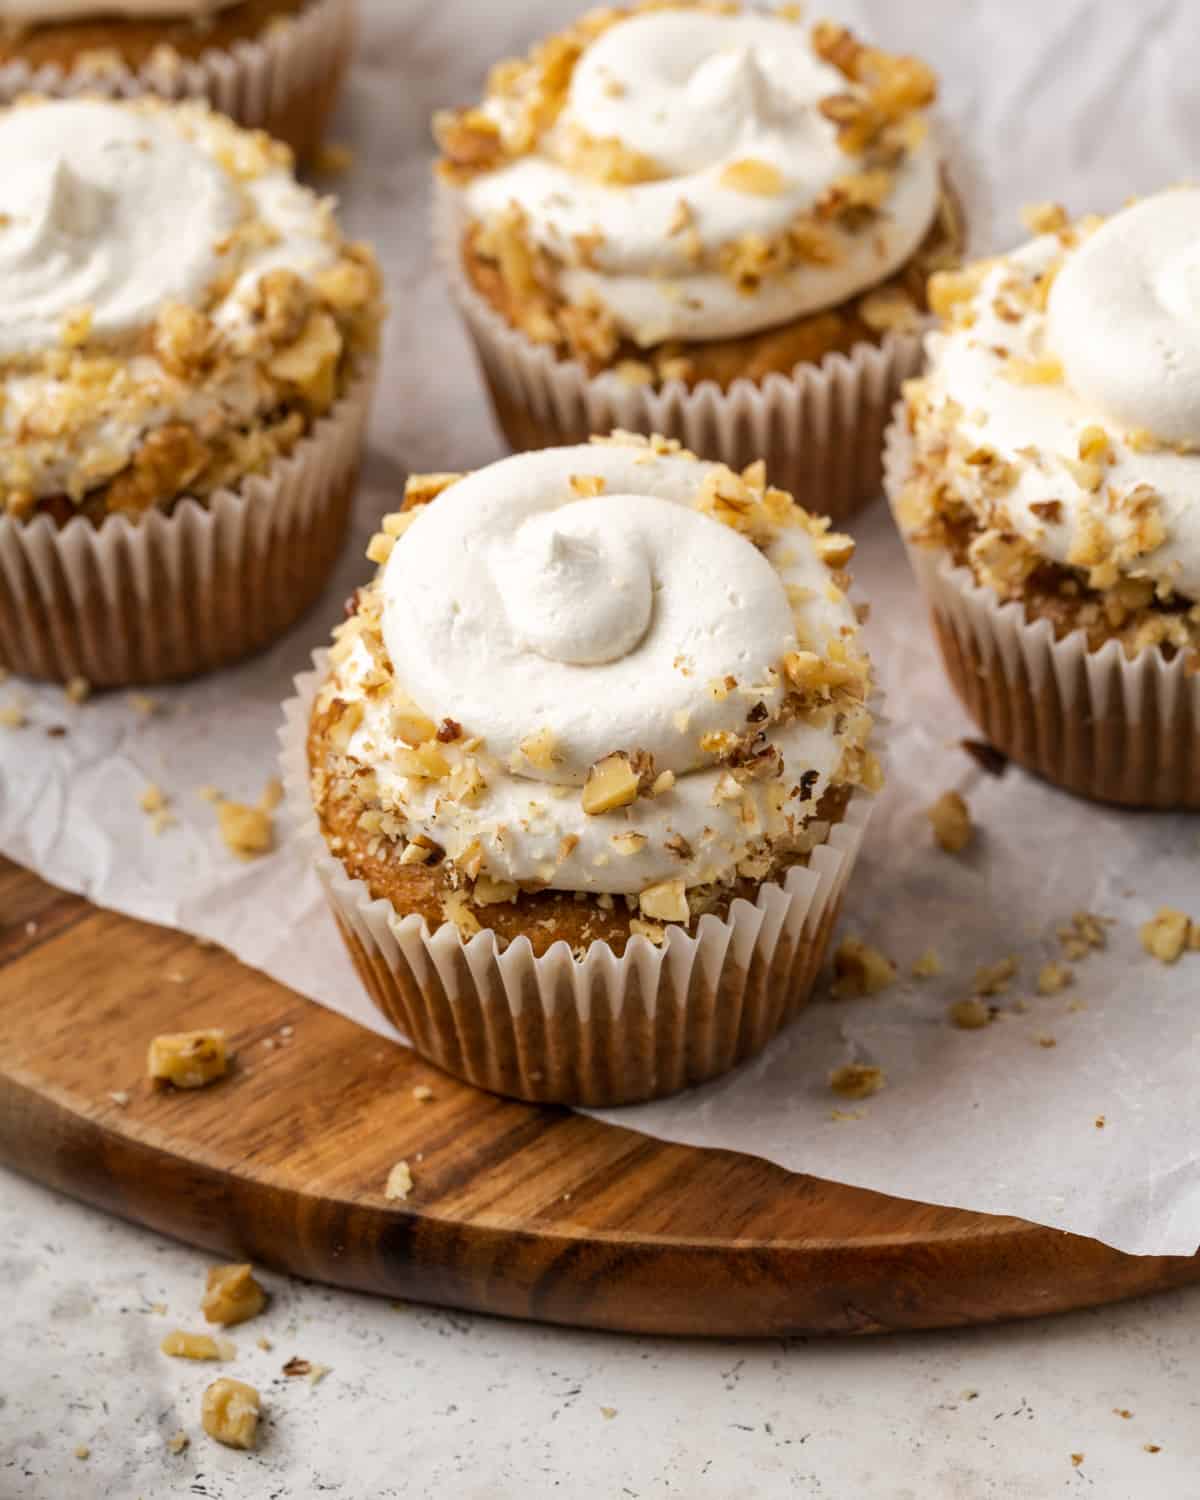 Gluten free carrot cake cupcakes decorated with cream cheese frosting and chopped walnuts.